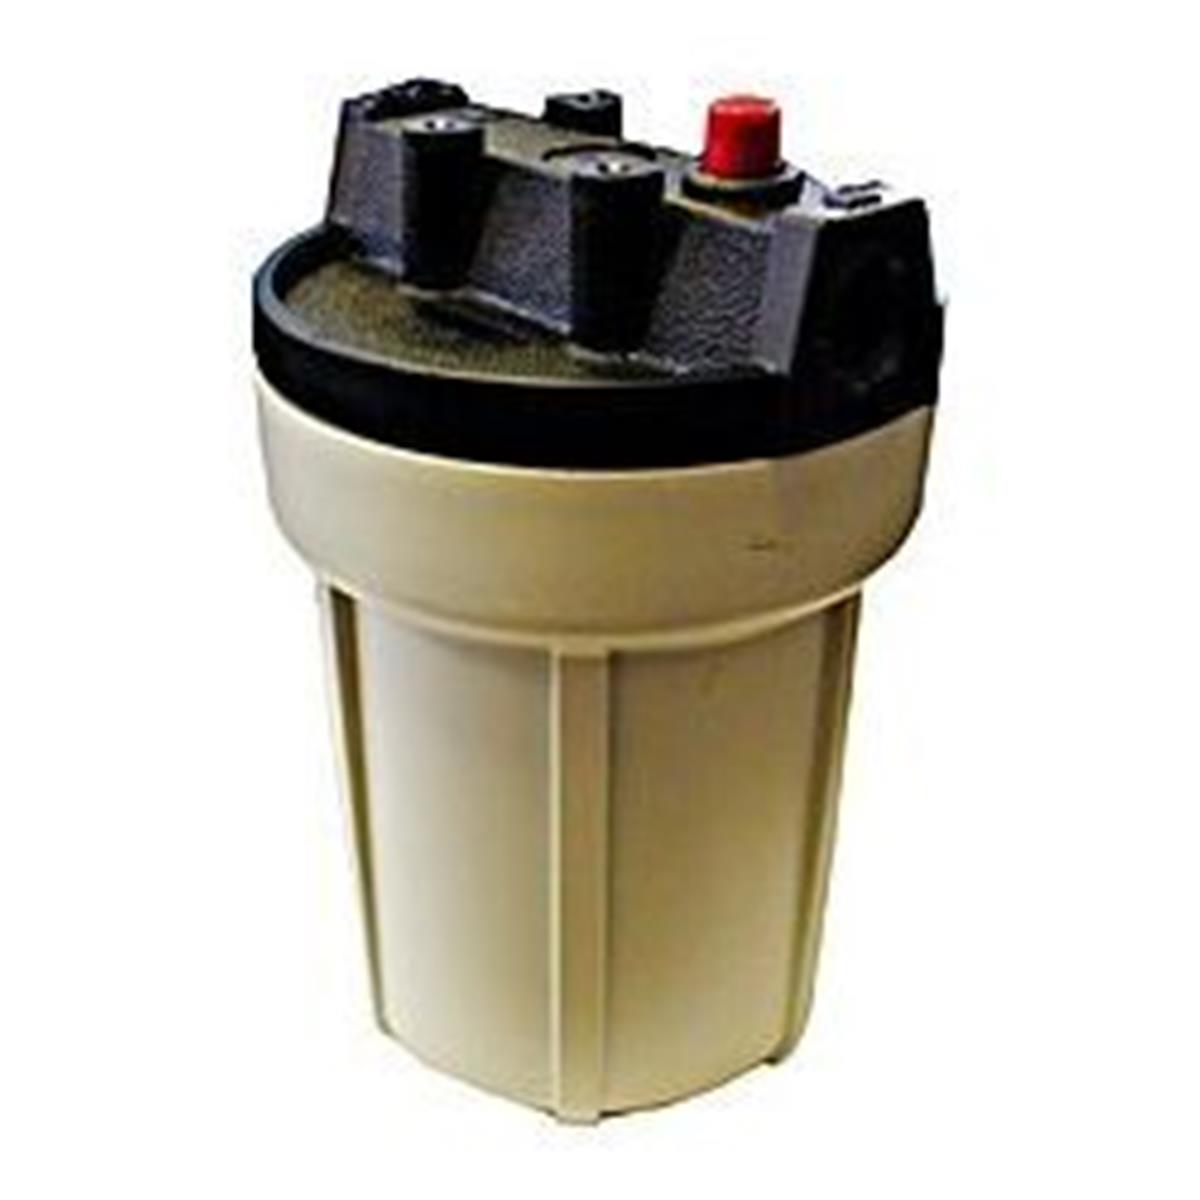 American-plumber-w385-pr 0.37 In. Undersink Compact Filter System